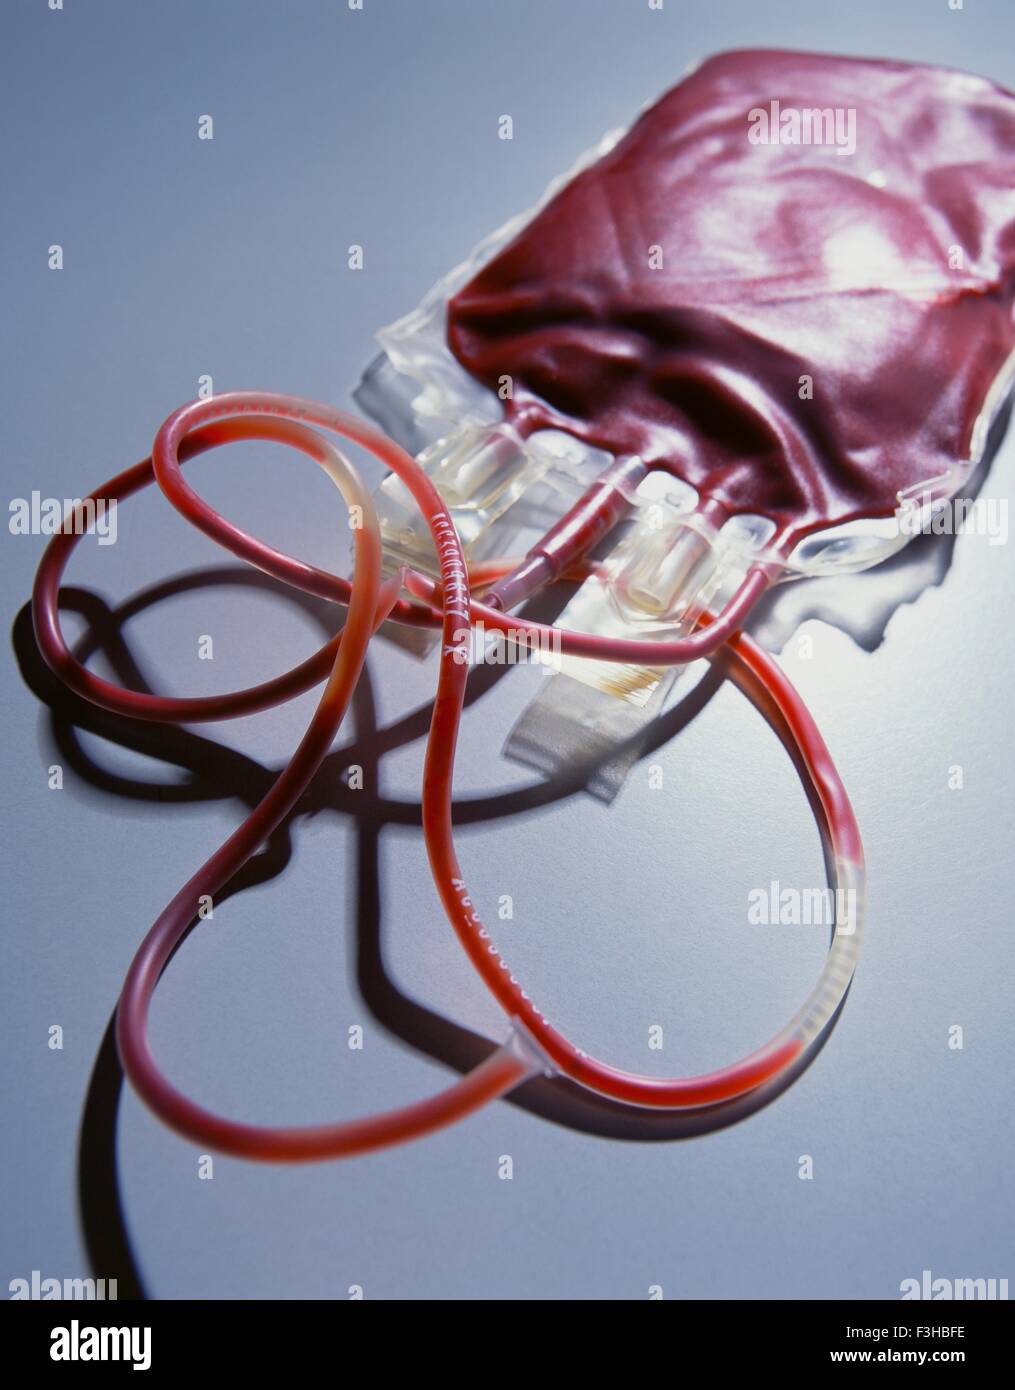 Bag containing a donation of blood for use in transfusions Stock Photo